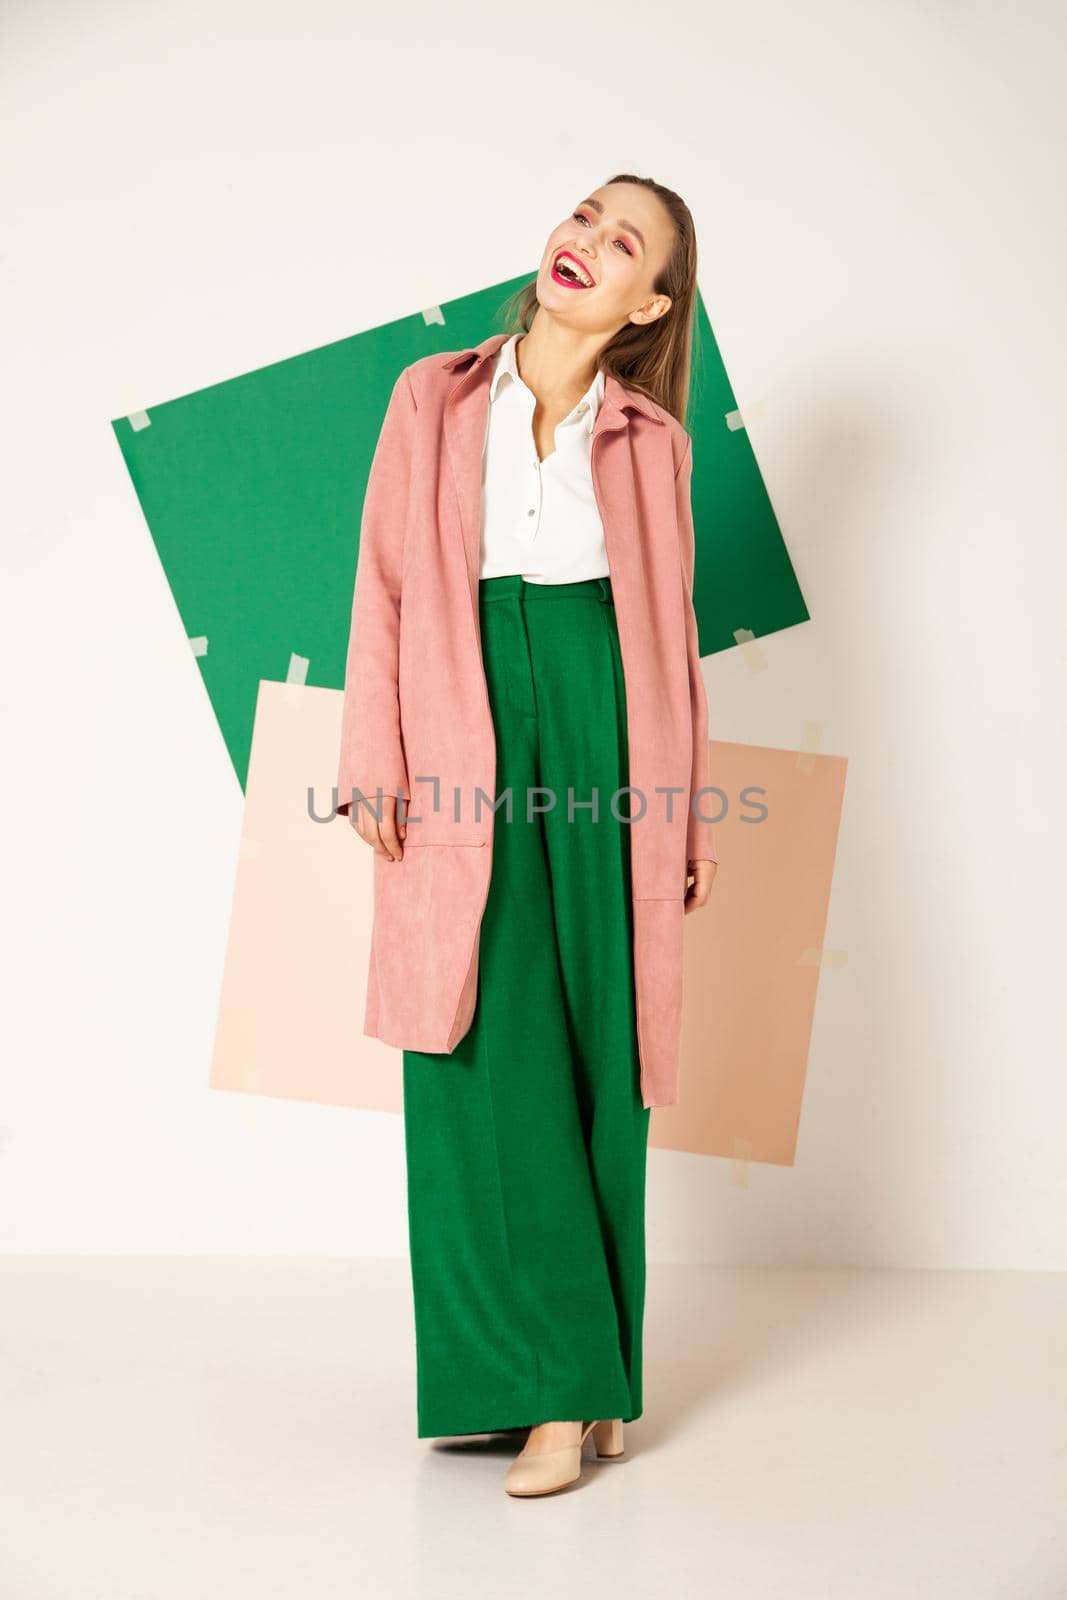 Confident young female model in elegant pastel pink coat and bright green pants representing spring fashion looking away in studio